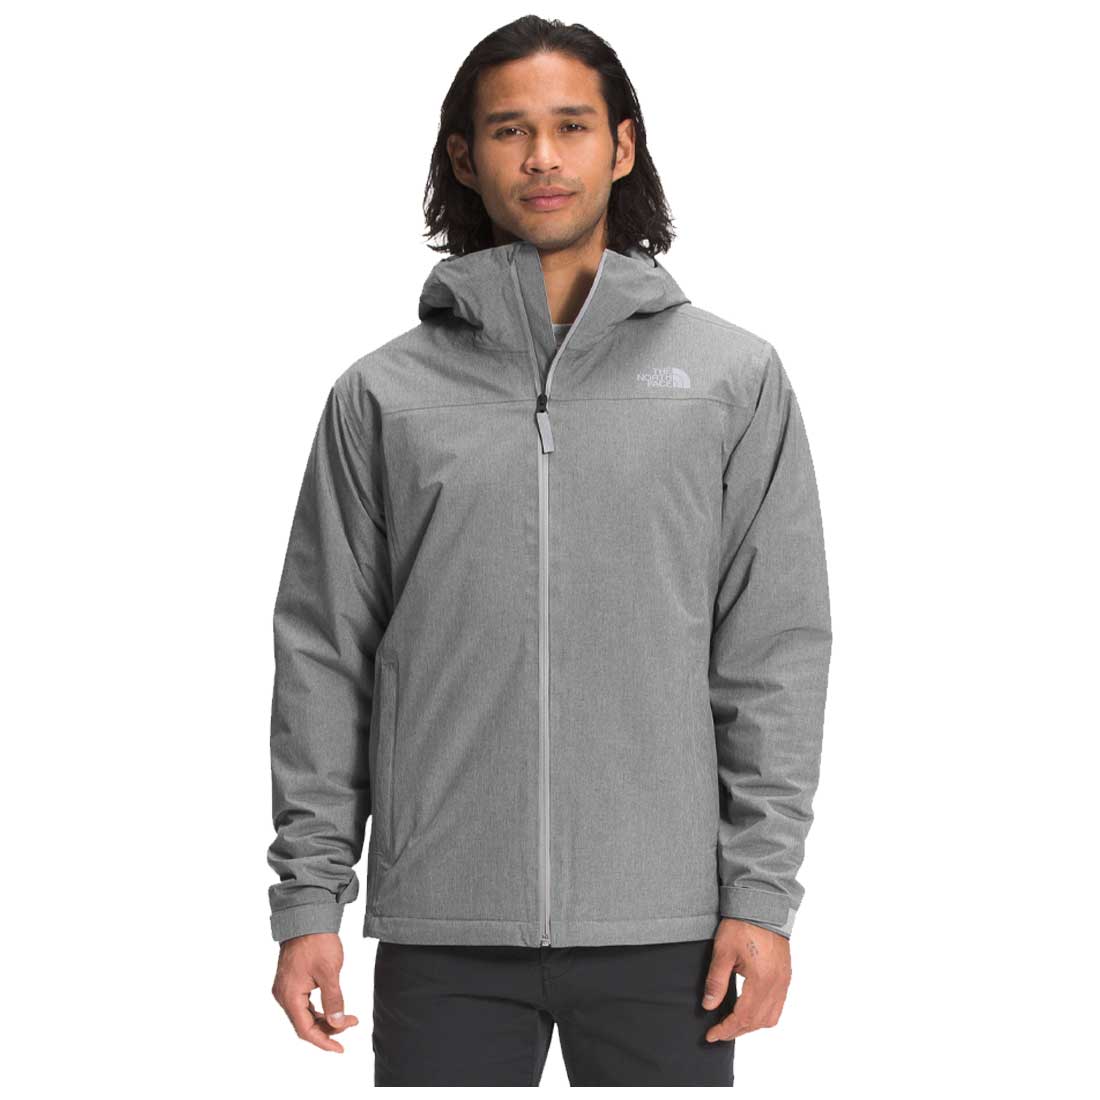 The North Face Dryzzle FutureLight Insulated Jacket - Men's